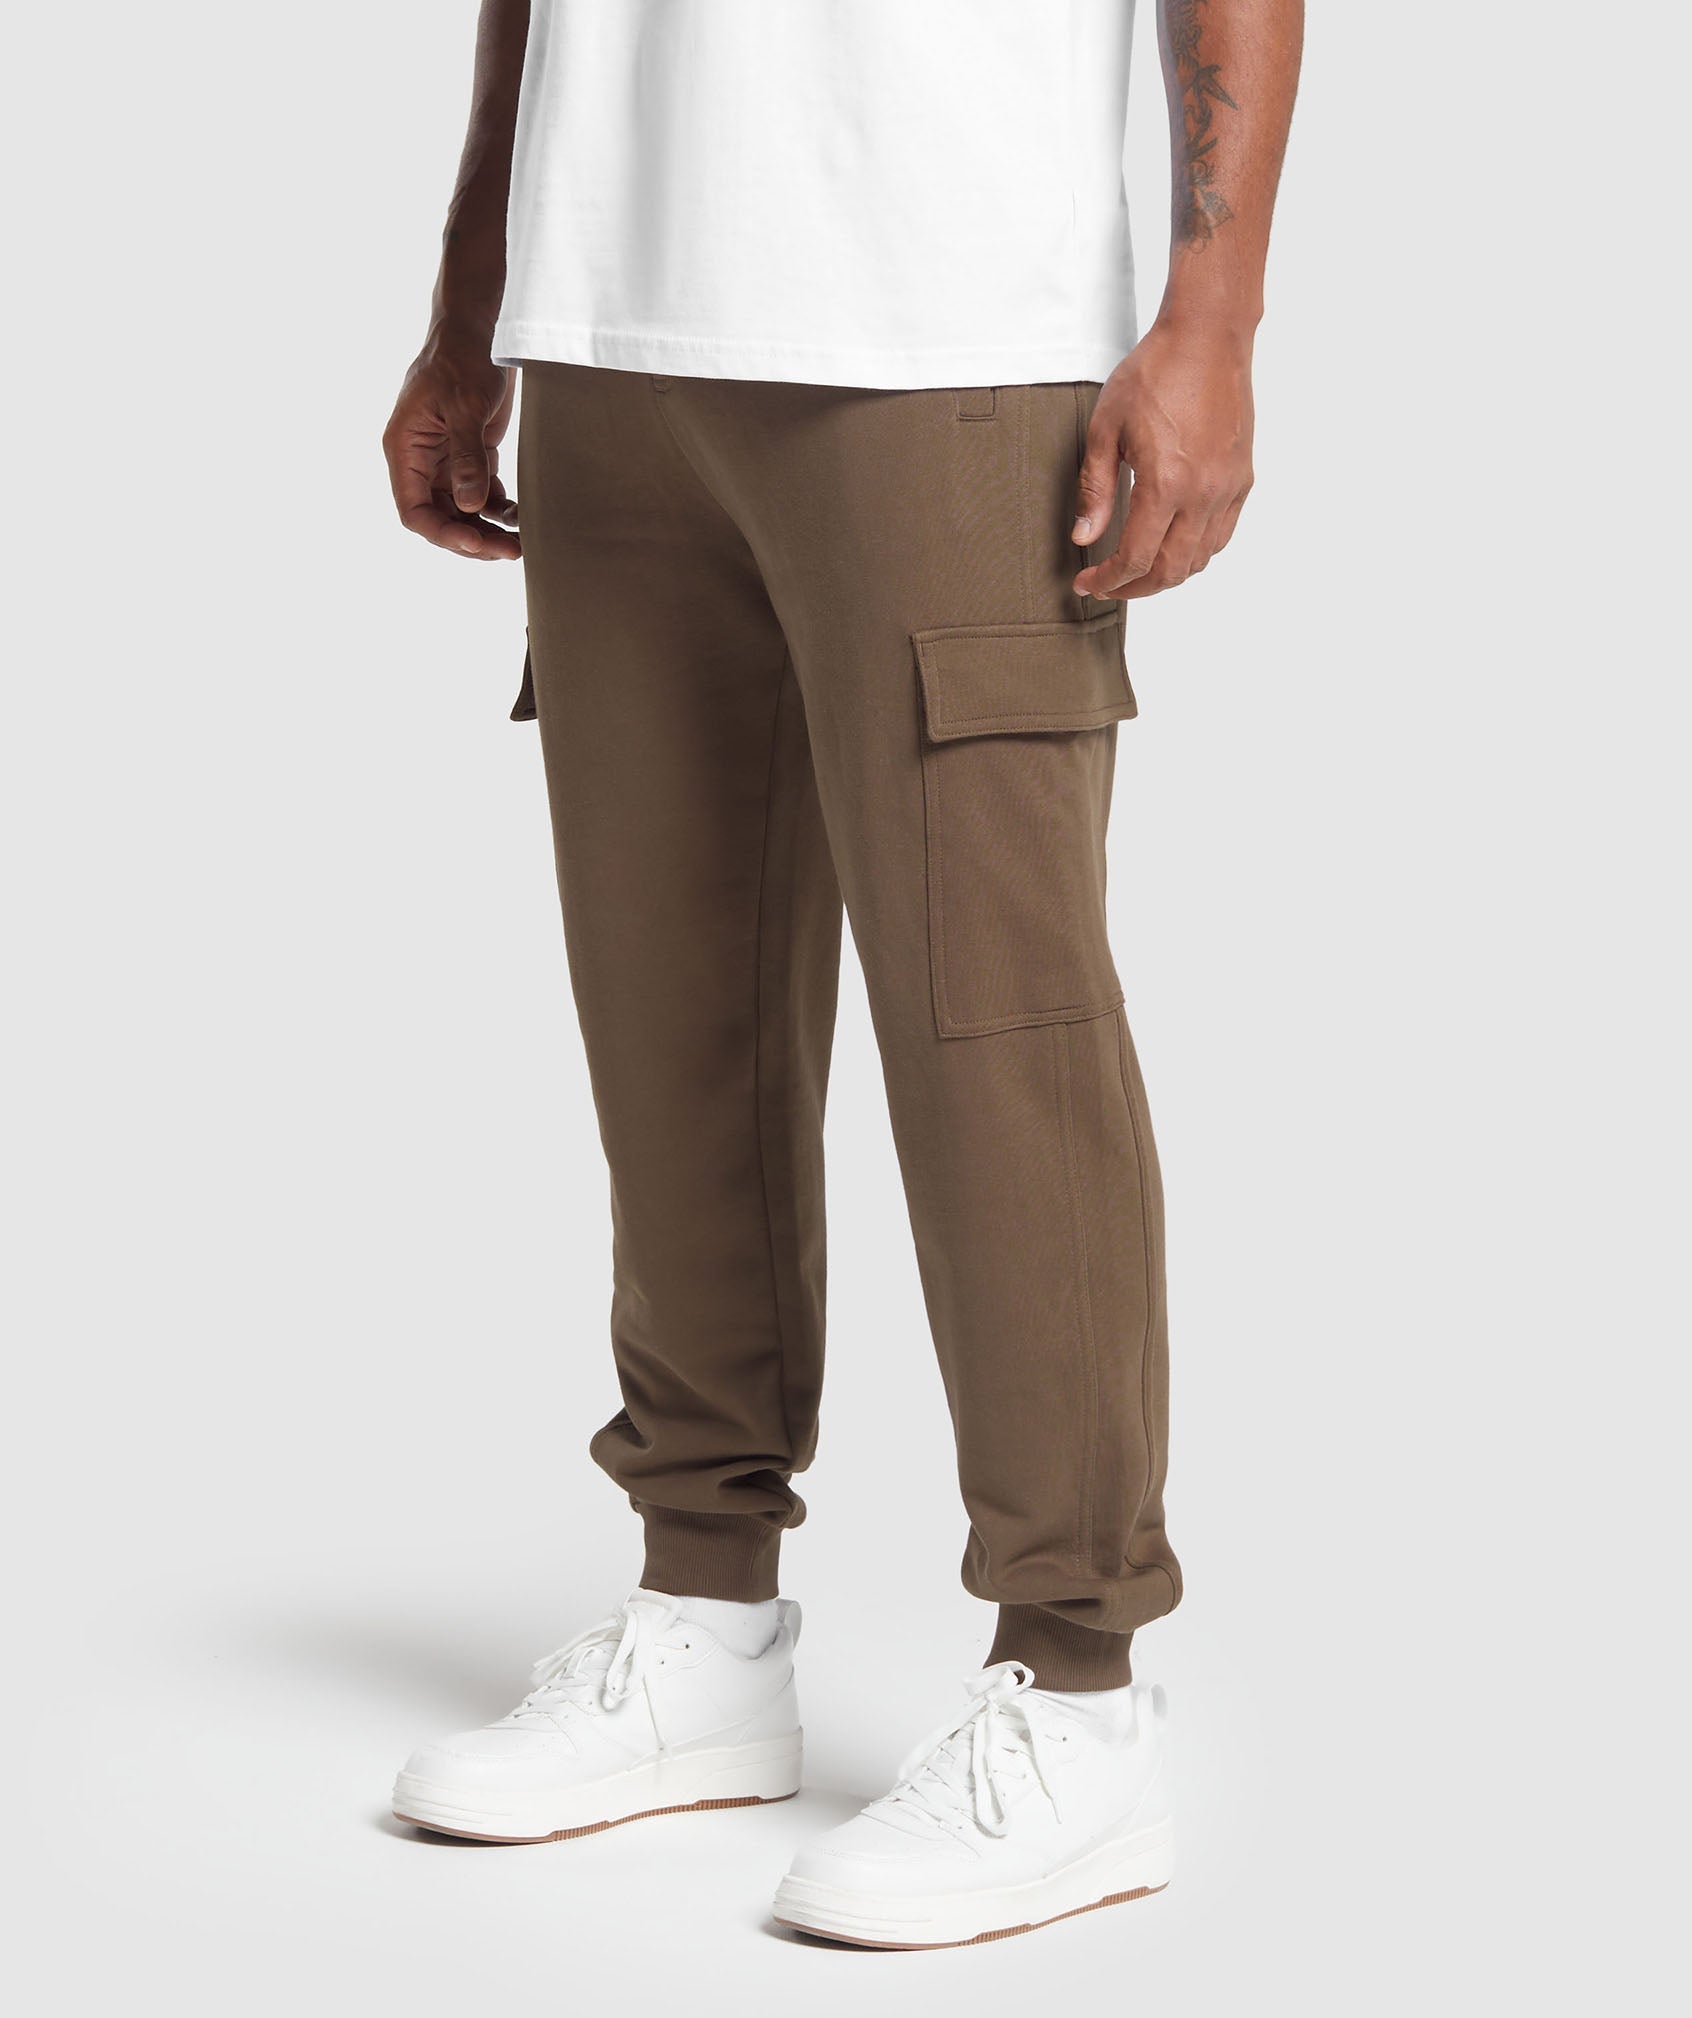 Rest Day Essentials Cargo Joggers in Penny Brown